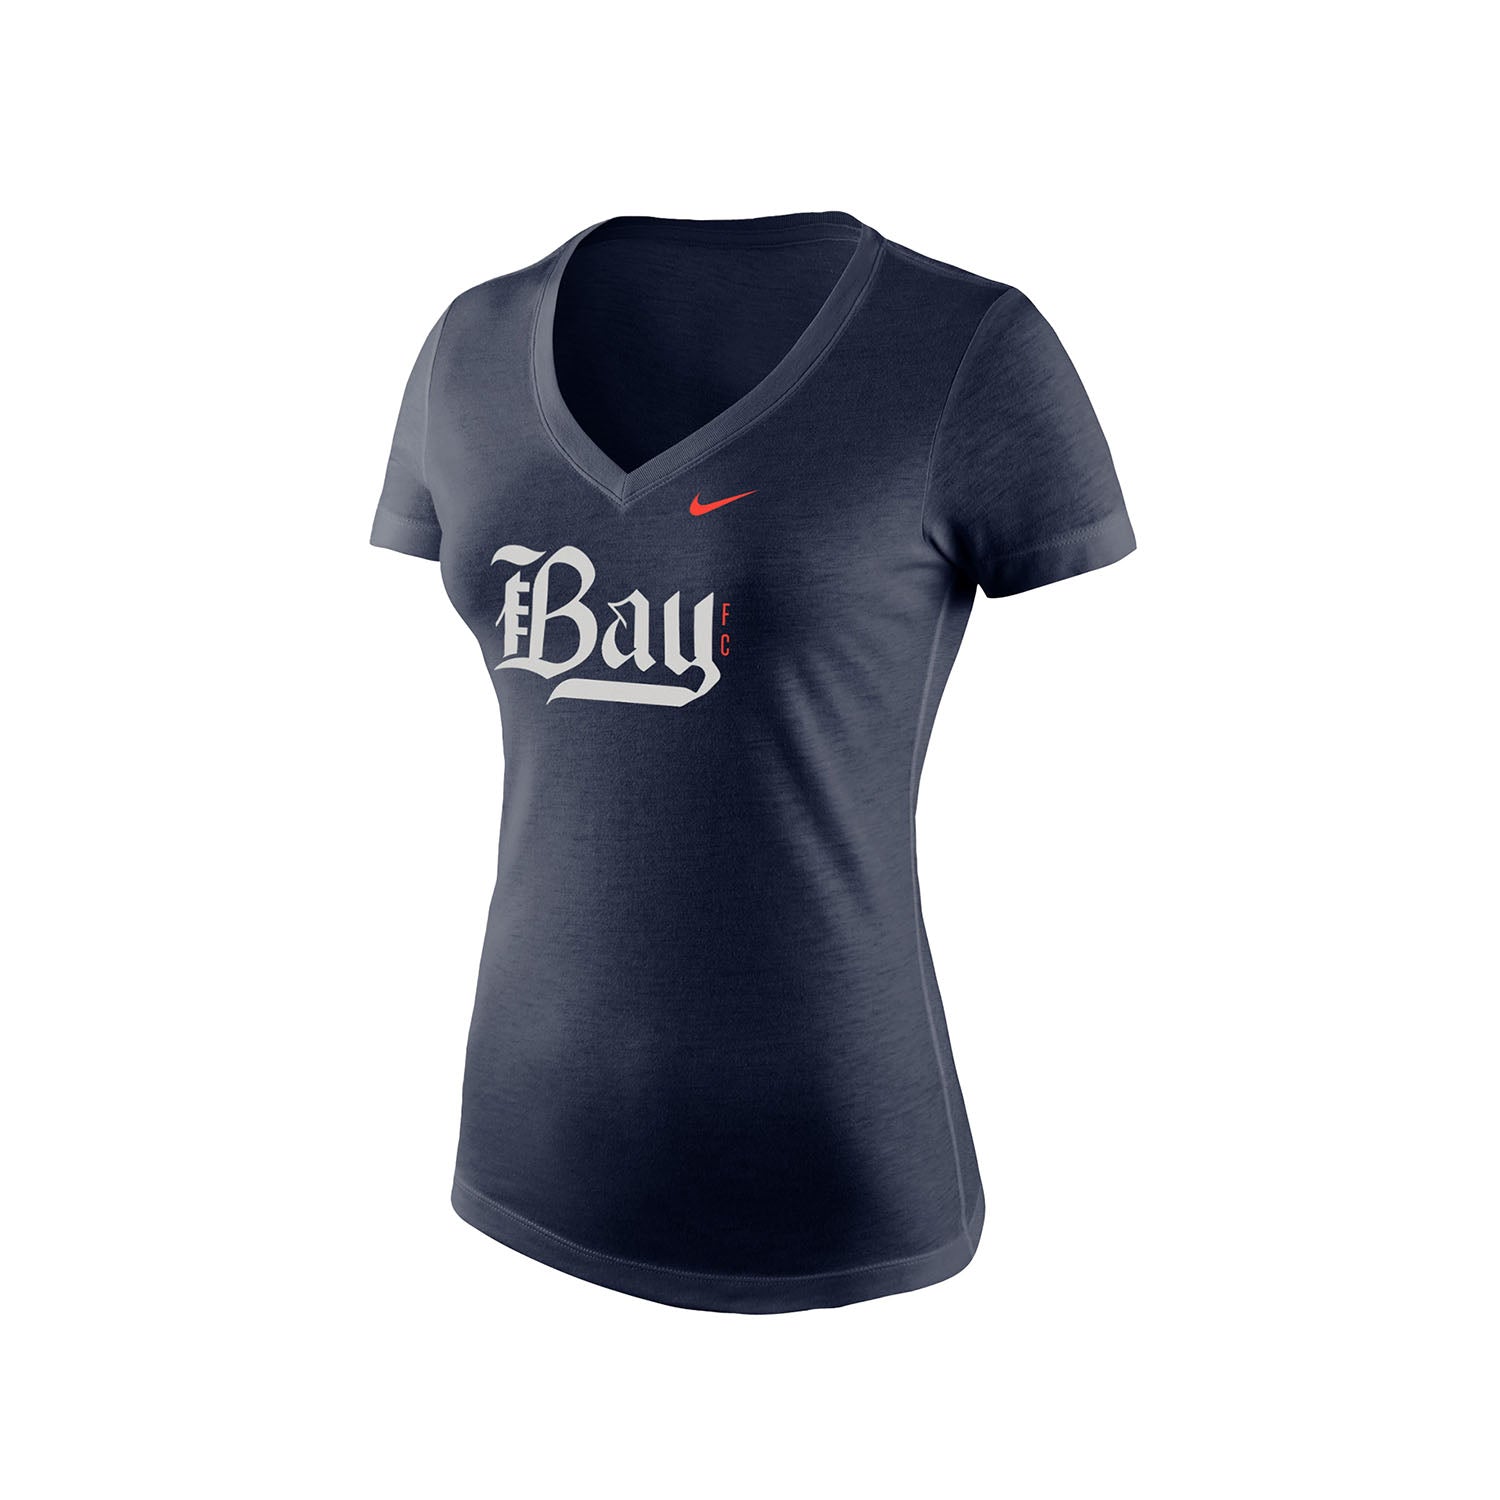 Women's Nike Bay FC Tri-Blend Navy Tee - Front View